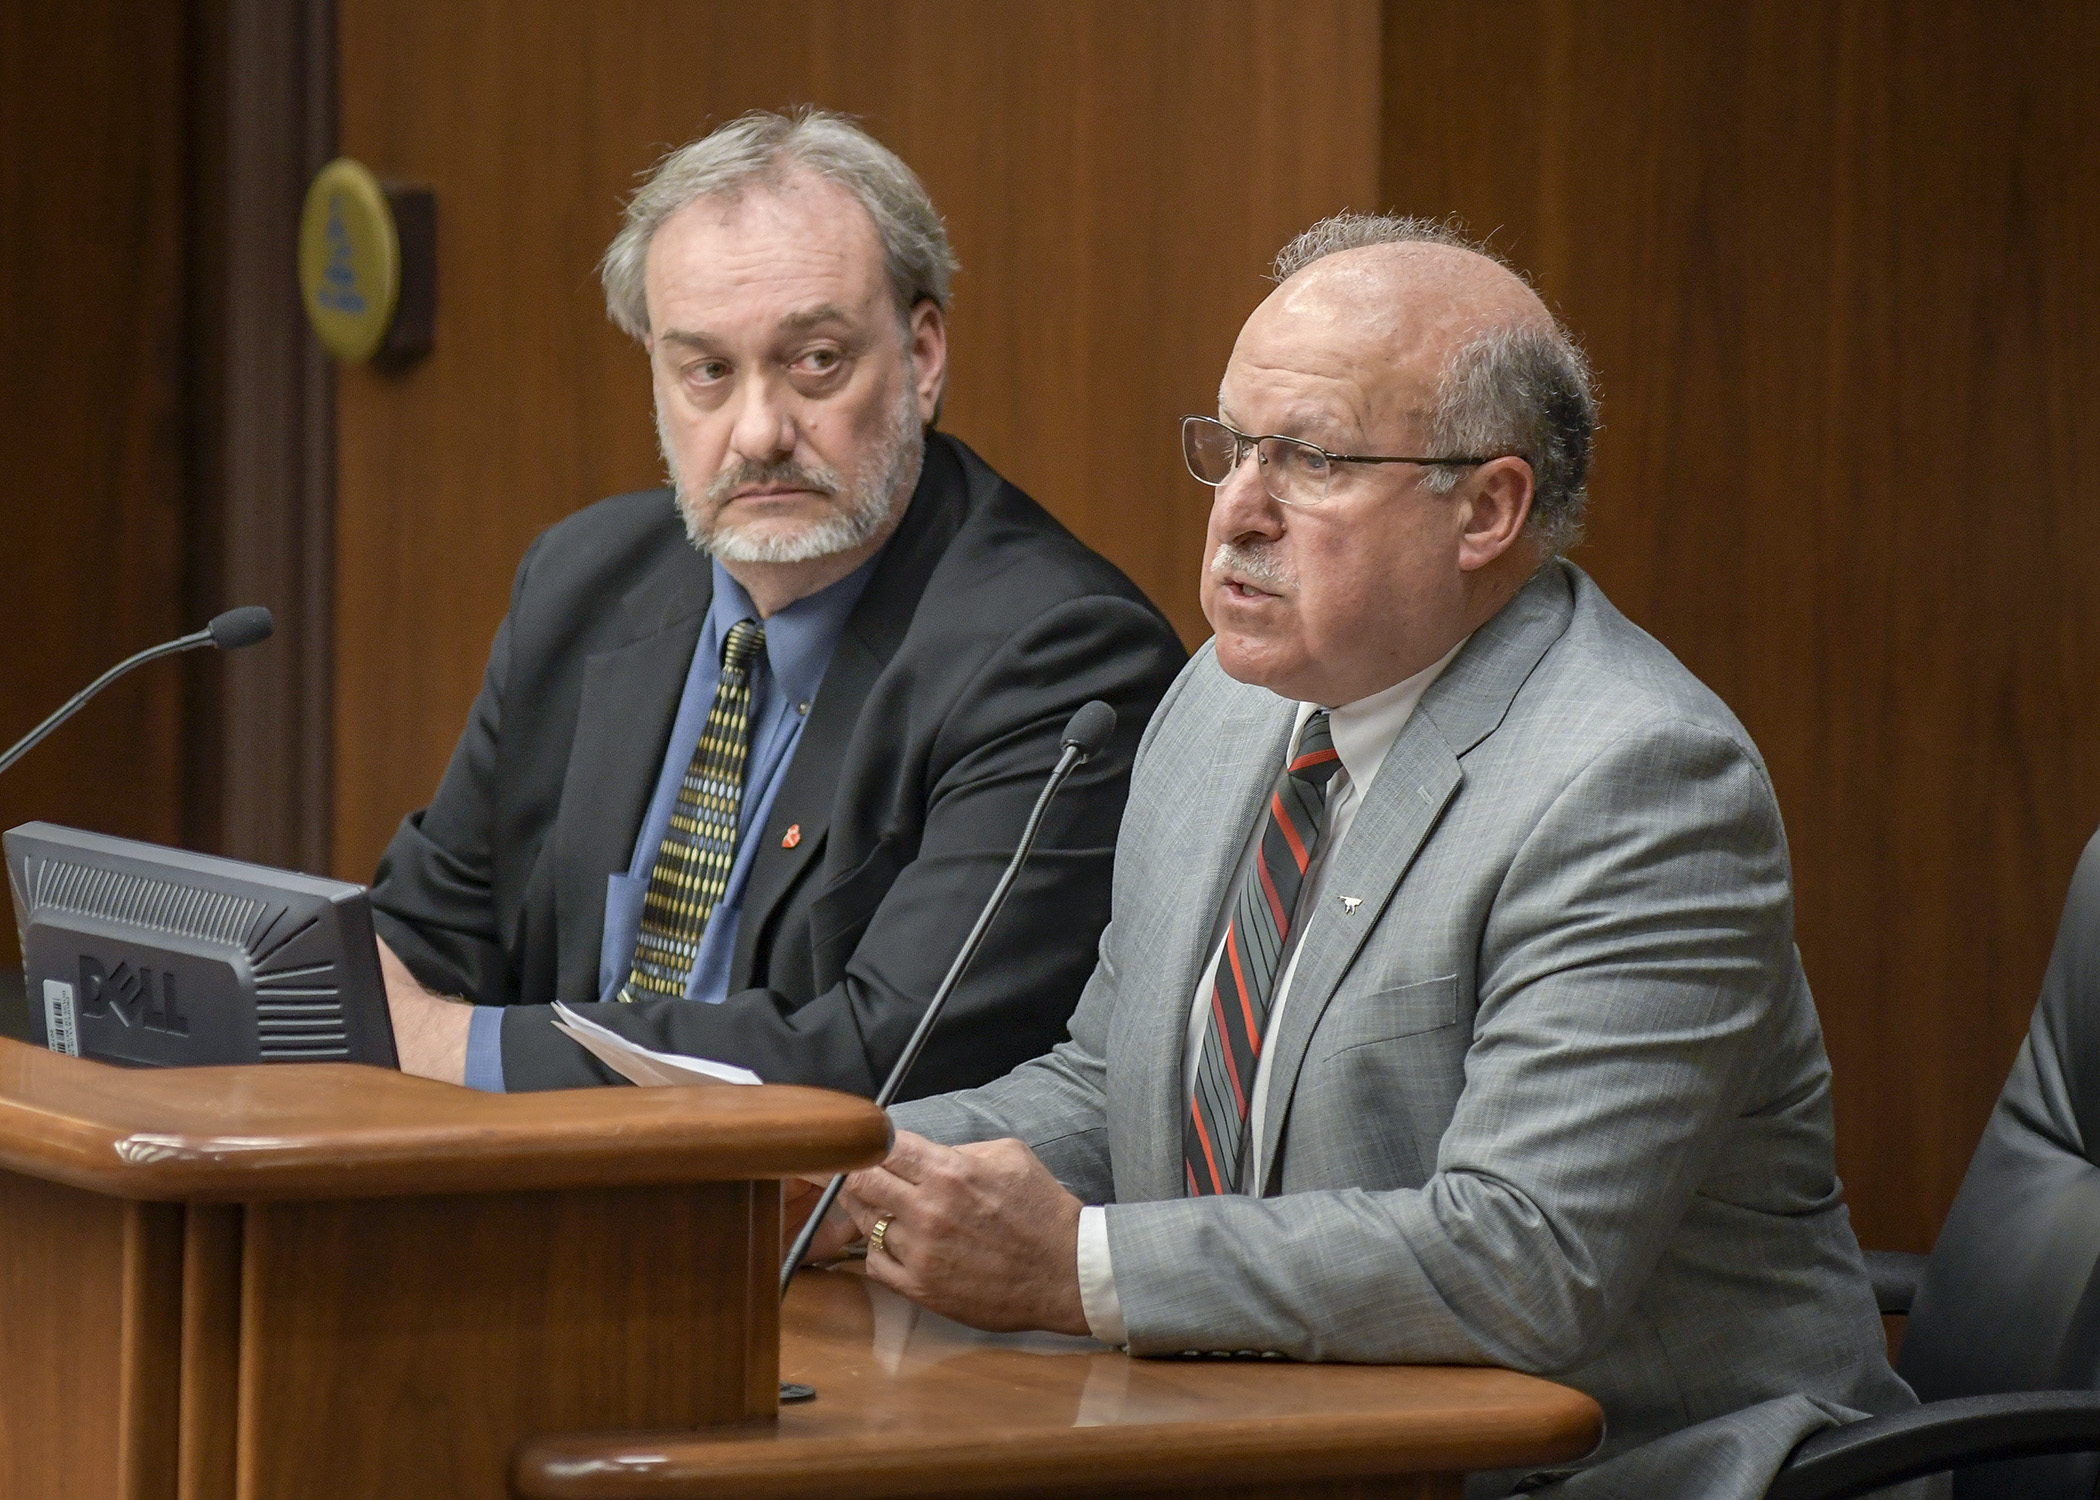 DNR Fish and Wildlife Director James Leach testifies Feb. 21 on a bill sponsored by Rep. Rick Hansen, left, that would provide wildlife disease surveillance and response funding. Photo by Andrew VonBank